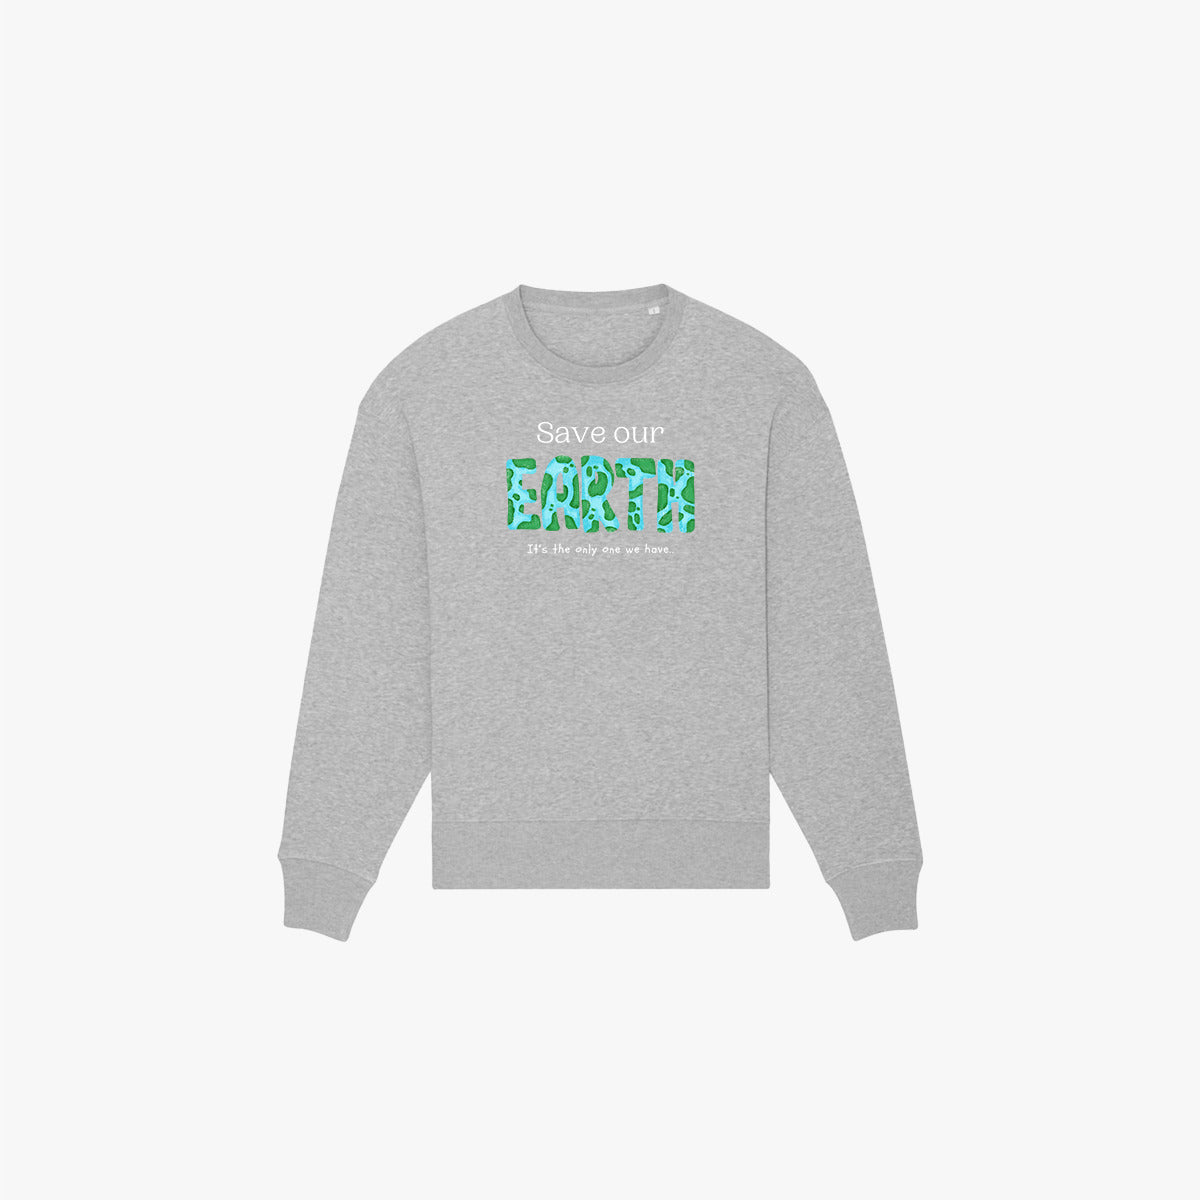 'SAVE OUR EARTH' Organic Oversize Sweatshirt in der Farbe Heather Grey